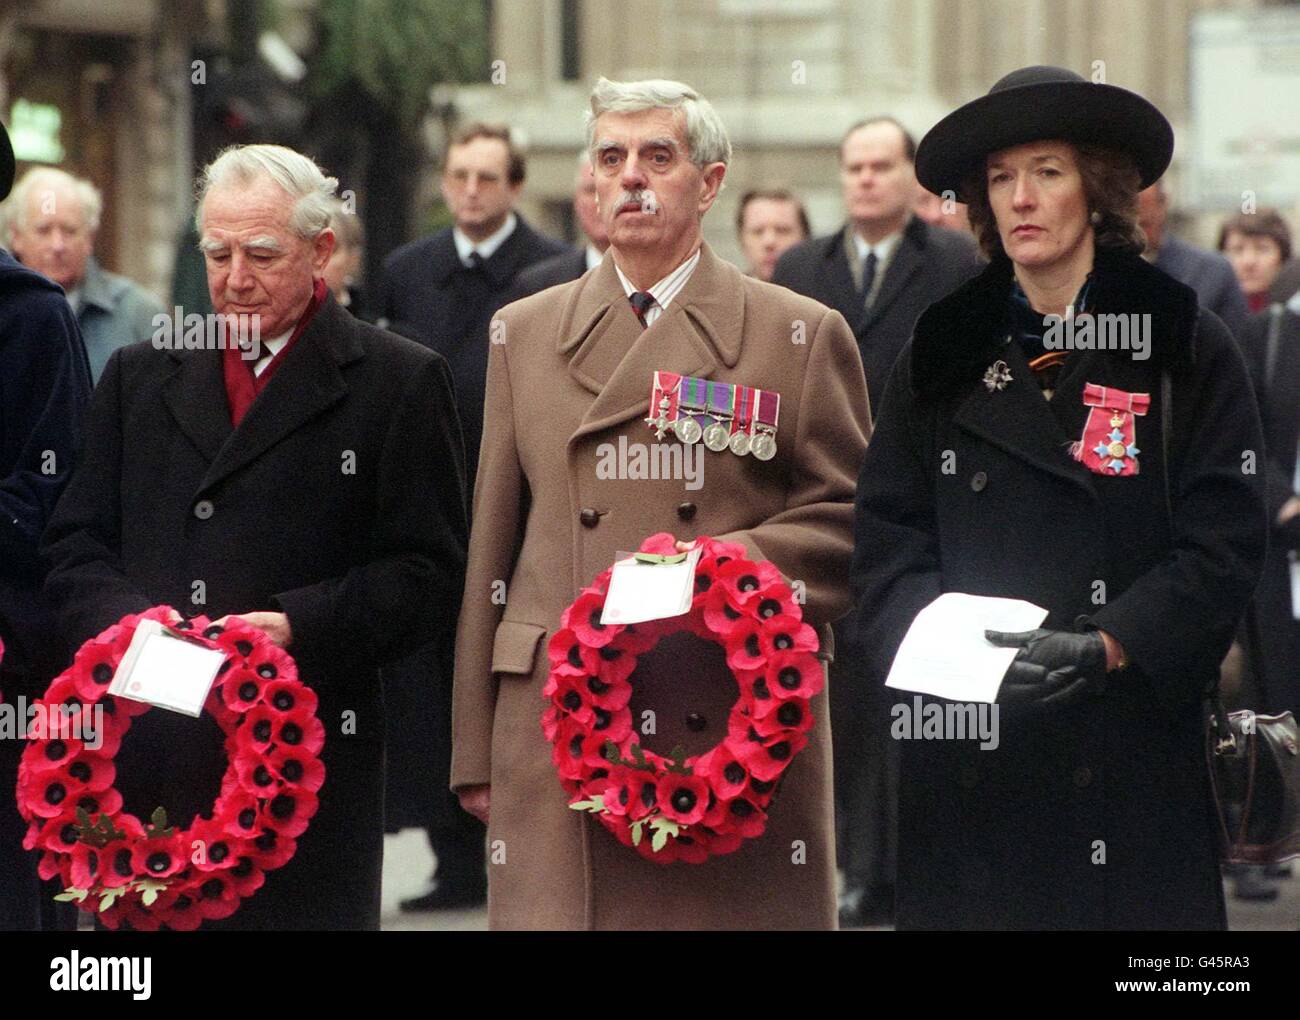 Sara Jones, widow of Lieutenant Colonel H Jones, who died commanding 2 Para and later awarded the VC, joins Desmond Keoghane (cen) and former governor of the Falklands Sir Rex Hunt at a ceremony to remember those who died during the Falklands conflict at the Cenotaph in Whitehall, central London today (Sat). Traffic came to a halt as veterans and bereaved relatives laid wreaths at the monument in a low-key ceremony attended by about 100 people. Mr Keoghane's son Kevin was a Welsh guard who was killed on board the Sir Galahad. See PA story DIPLOMATIC Falklands. Photo by Sean Dempsey/PA. Stock Photo